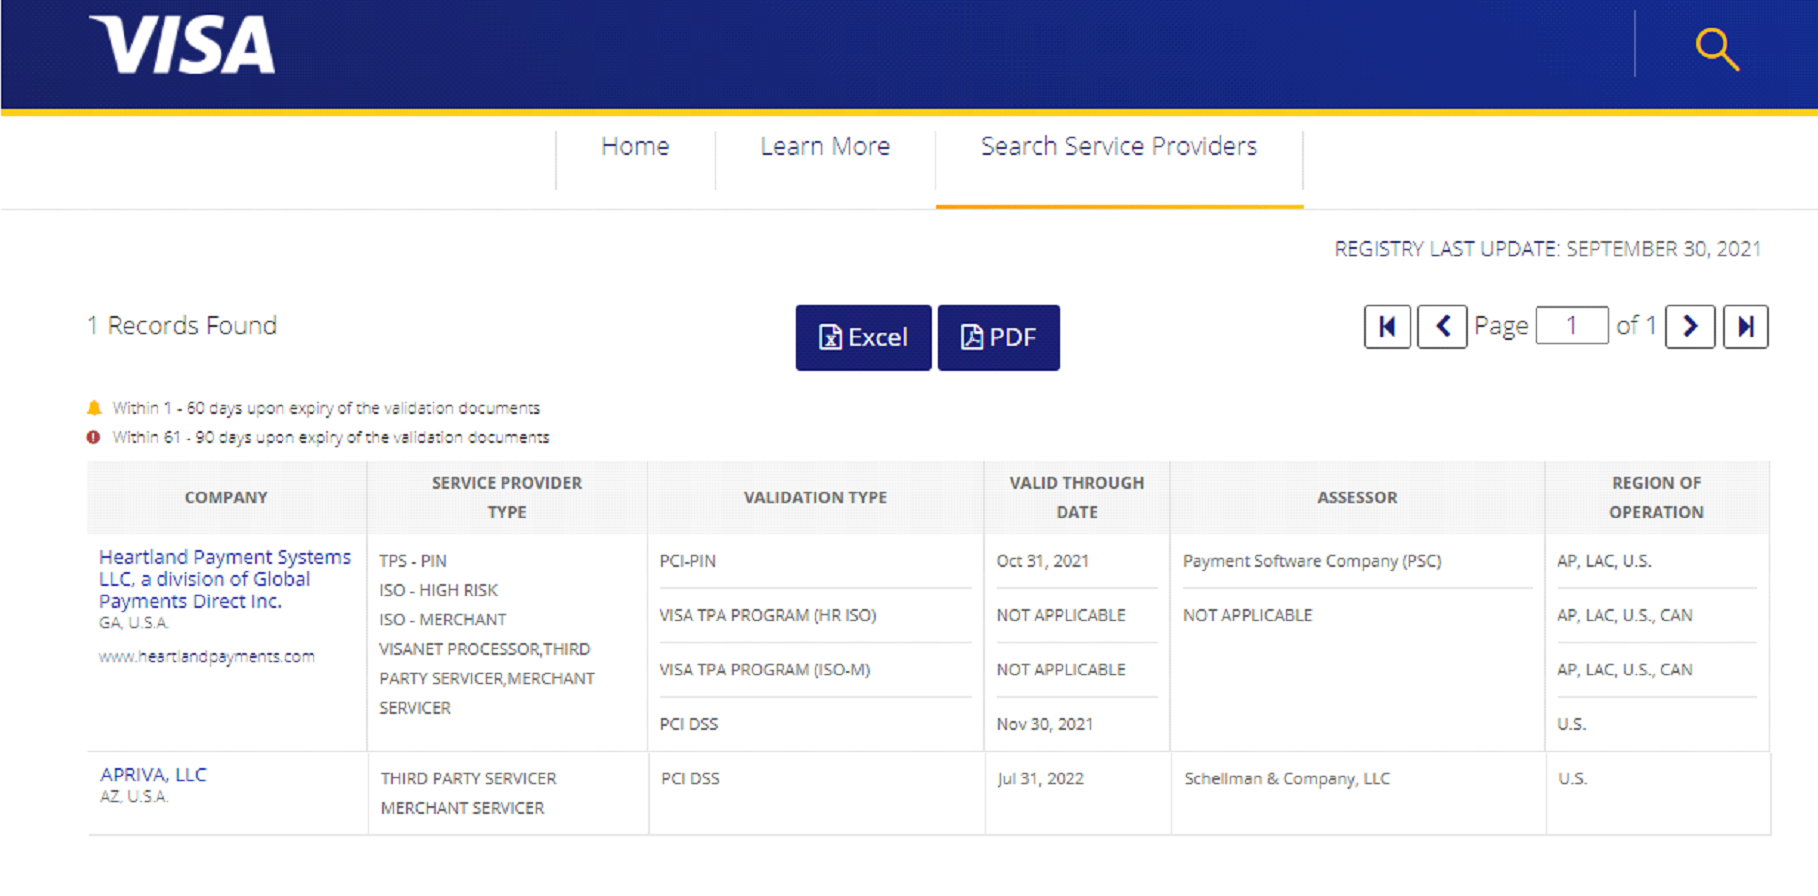 Screenshot of Visa's Search Service Providers, showing results for Heartland Payment Systems